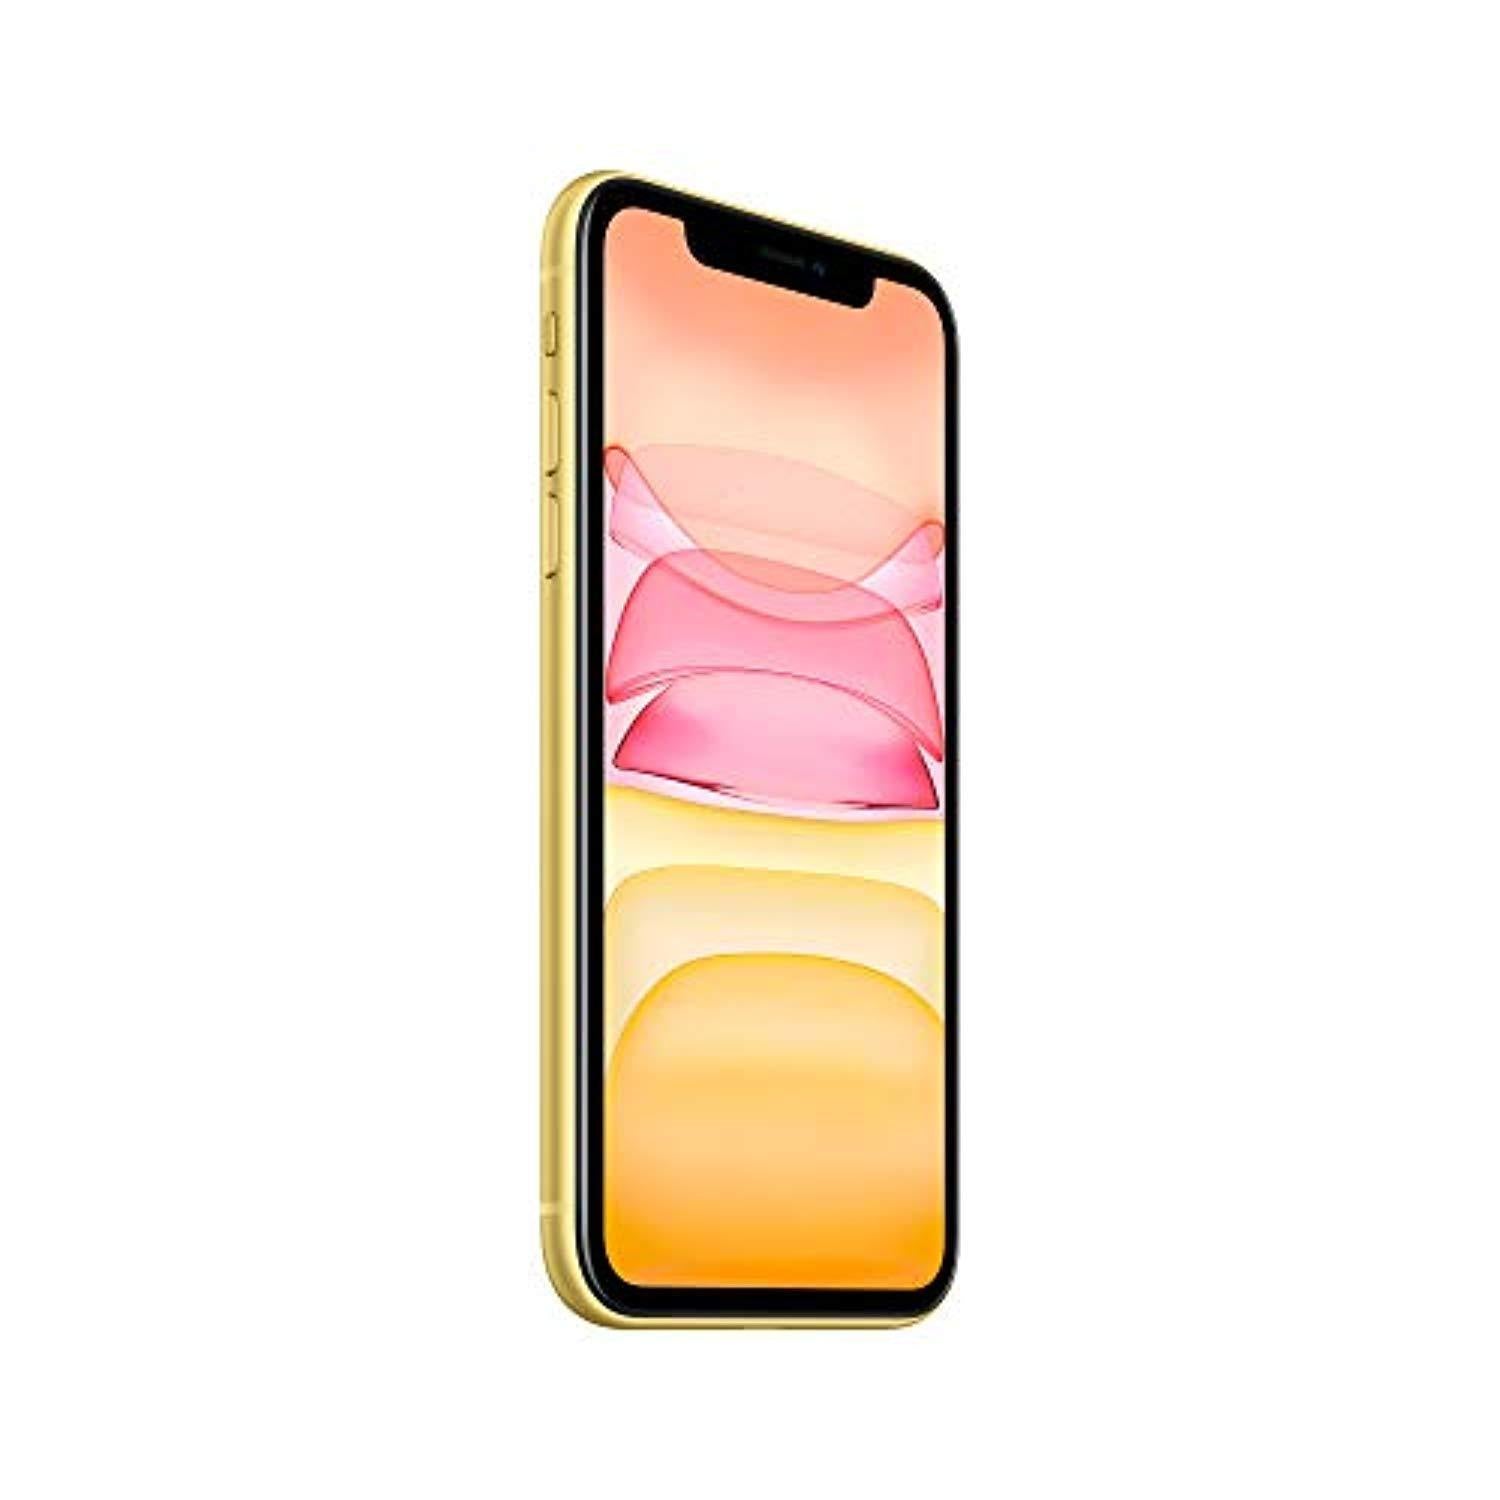 Apple iPhone 11 - Offer Games